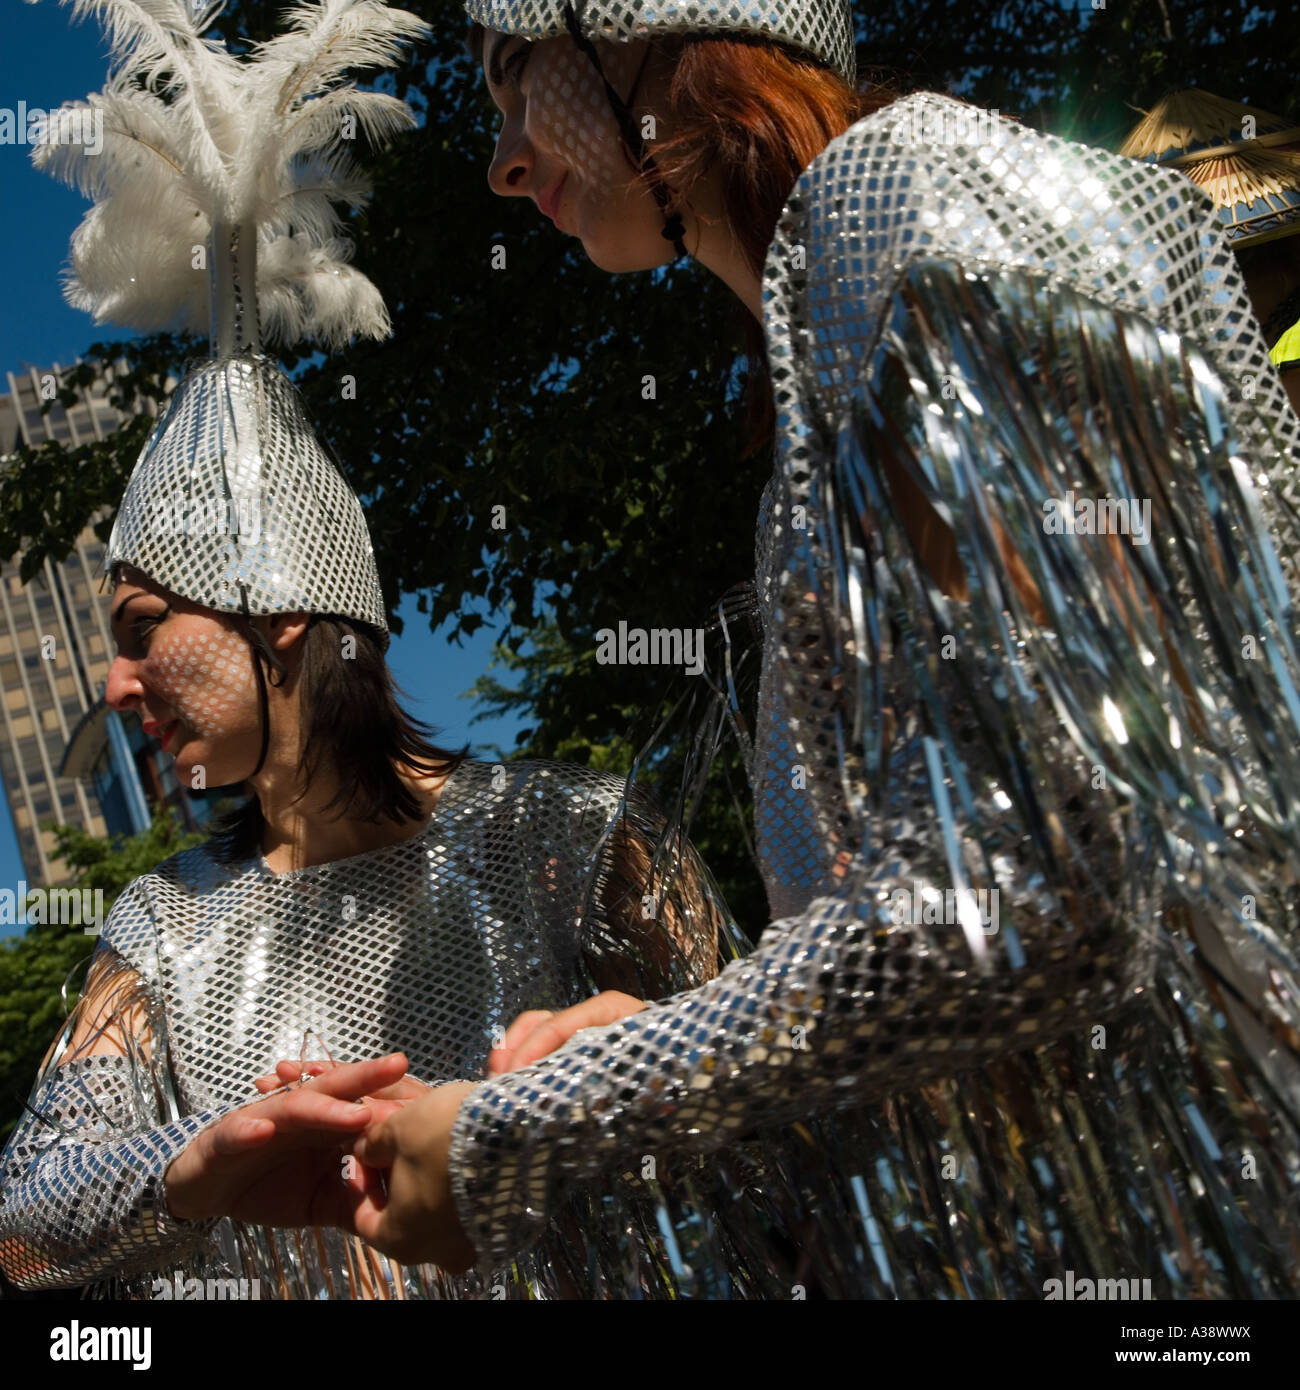 Women dressed up in exotic silver clothes for a street carnival South Bank London England UK (2006) Stock Photo